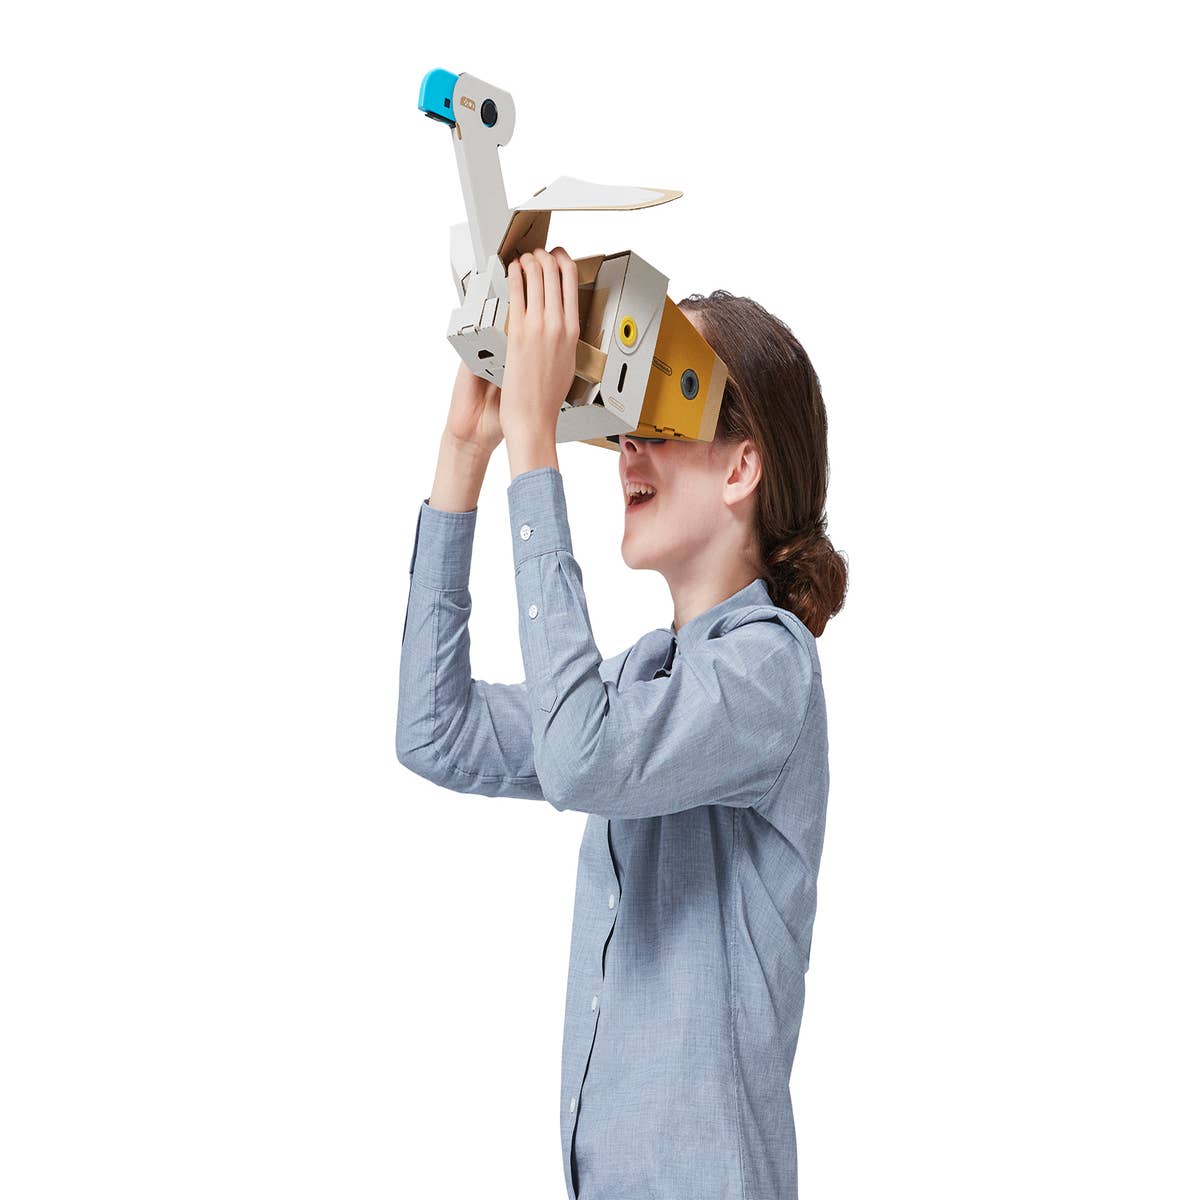 Breath of the Wild' Coming to VR With Nintendo Labo Kit